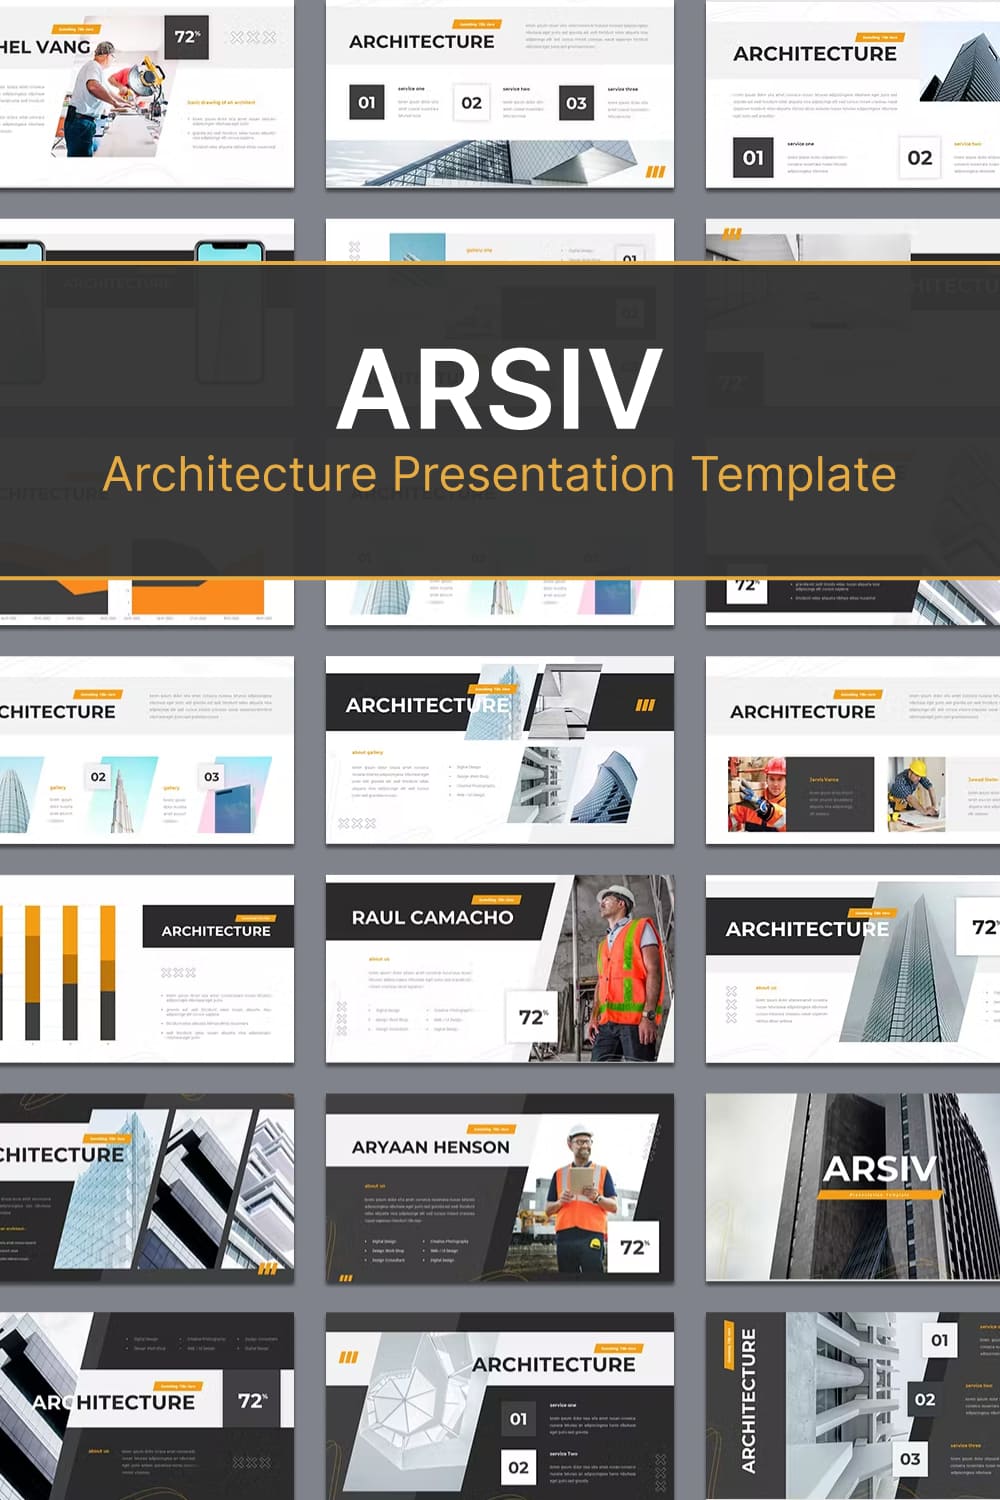 Architecture presentation template - pinterest image preview.